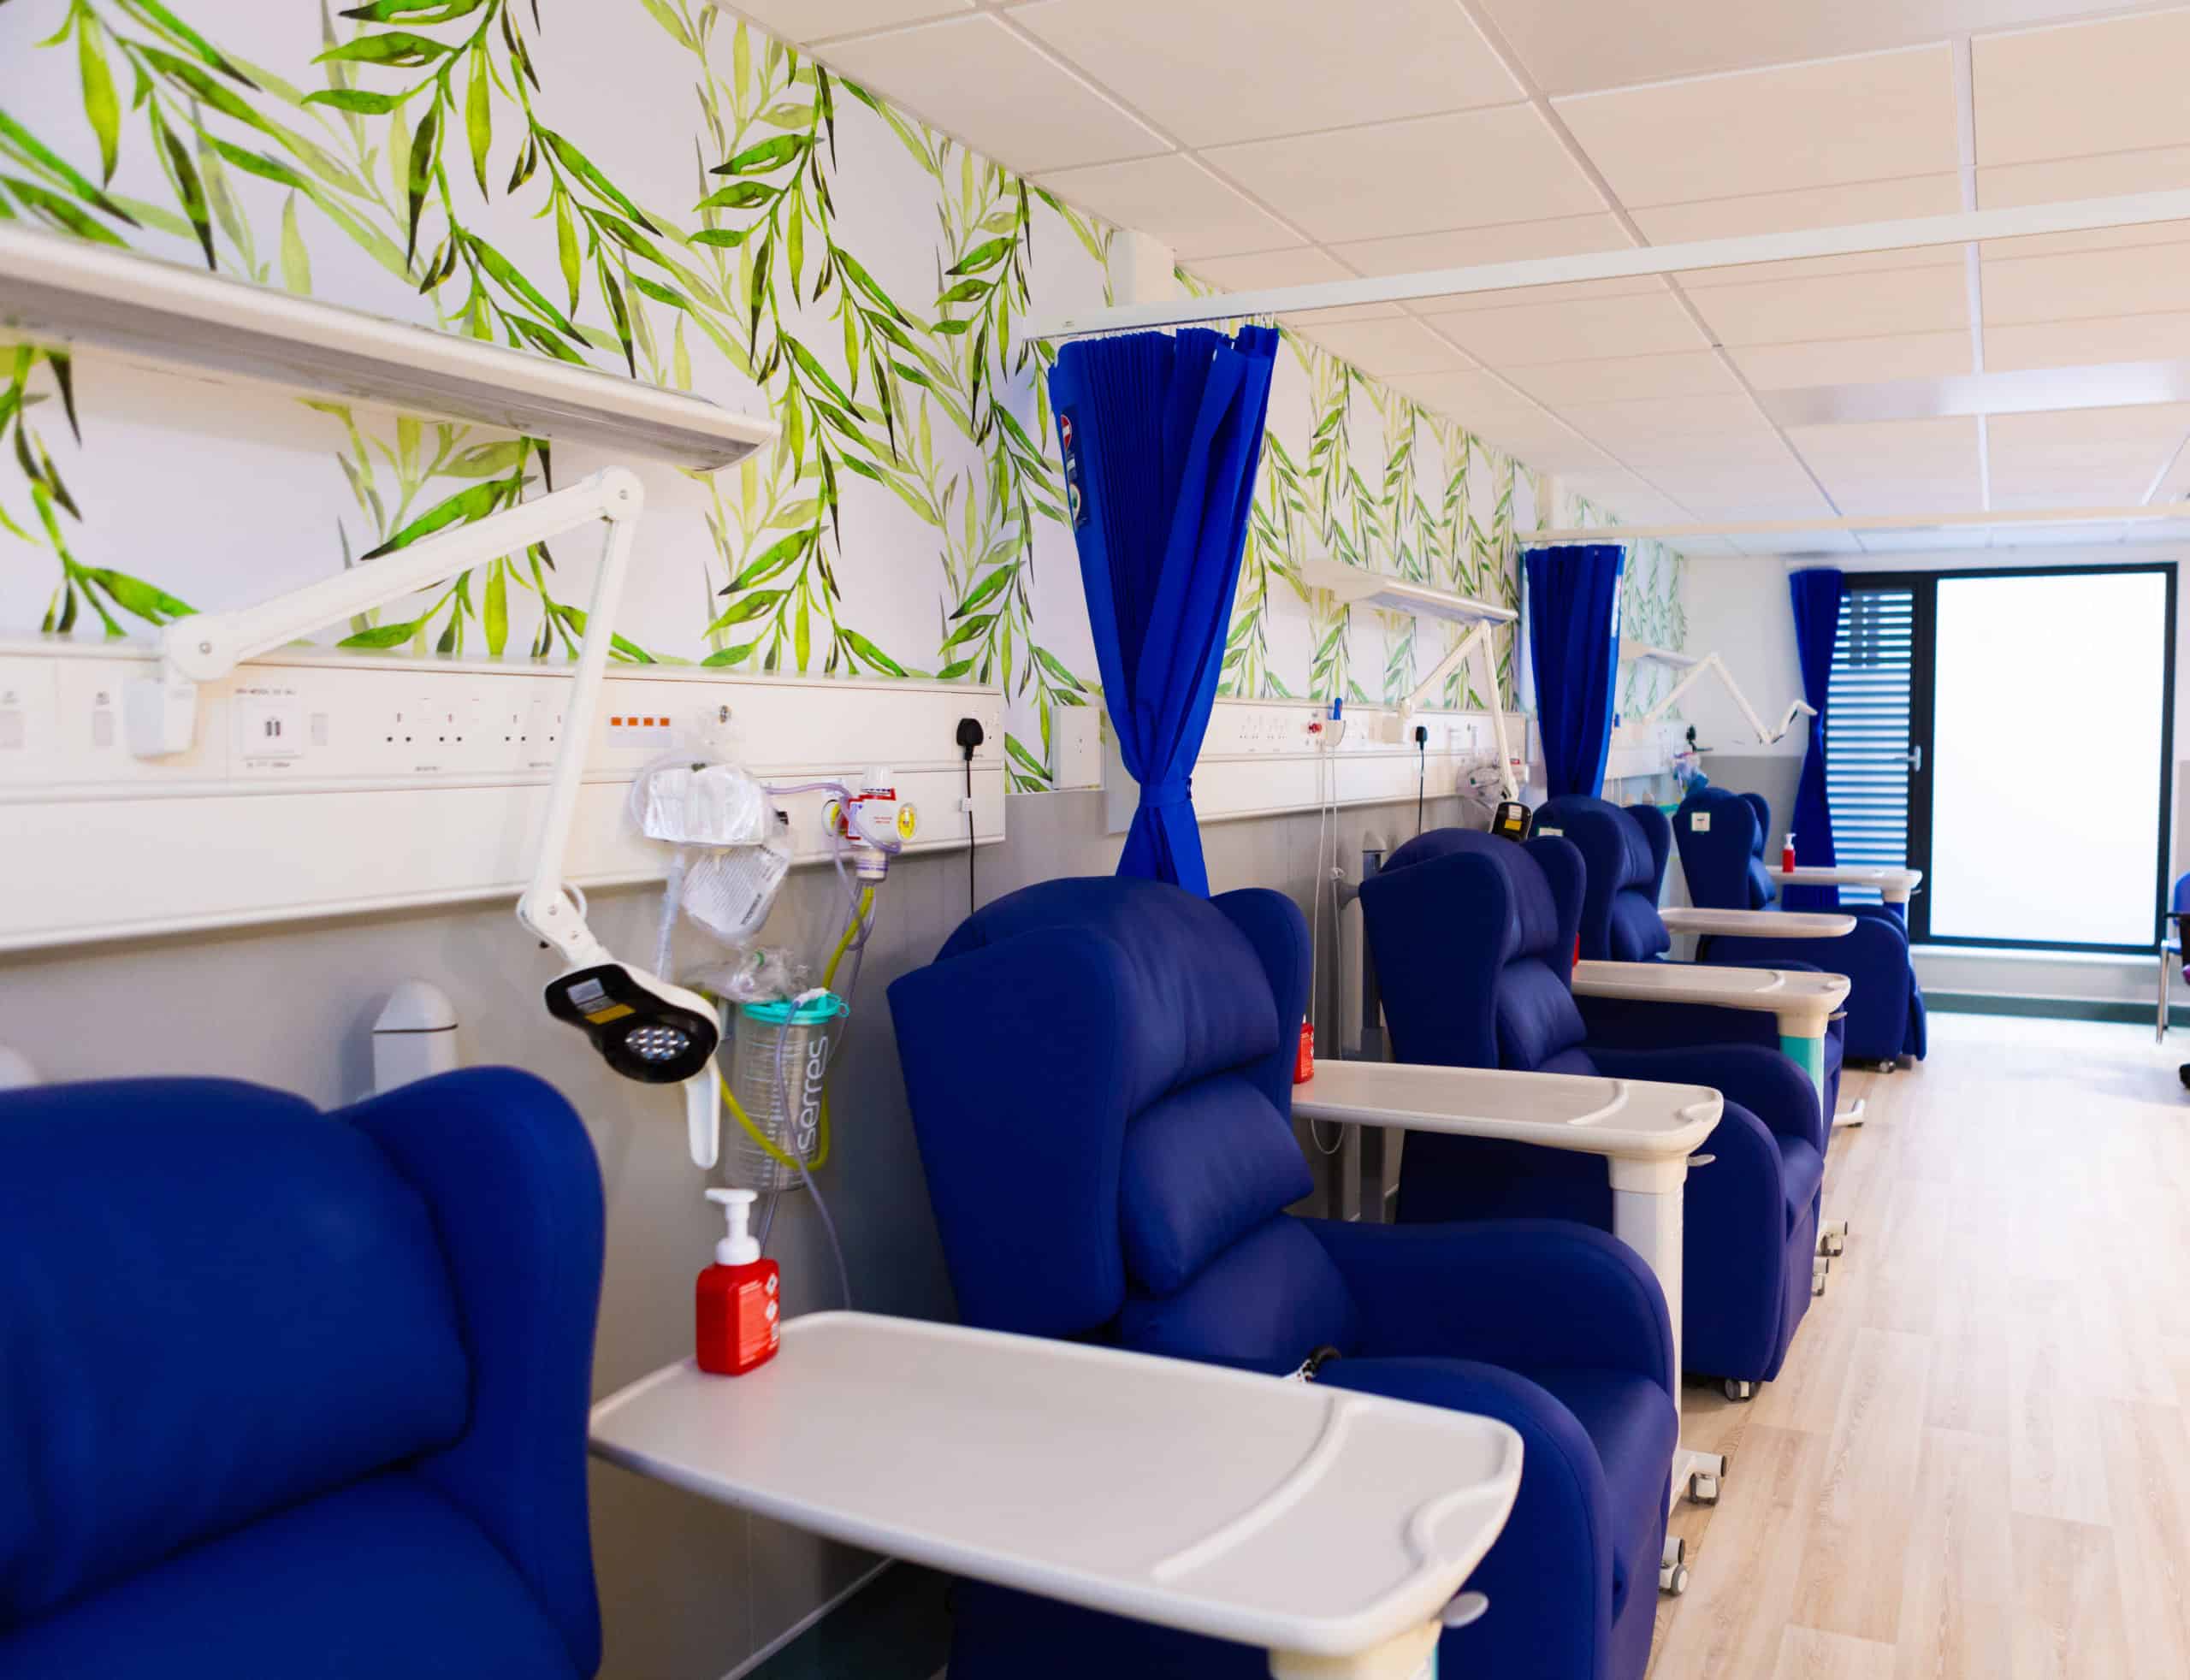 Hospital room inside modular healthcare building. Patient area, with comfy chairs and desks, as well as curtains for privacy although in this image they are pulled back.